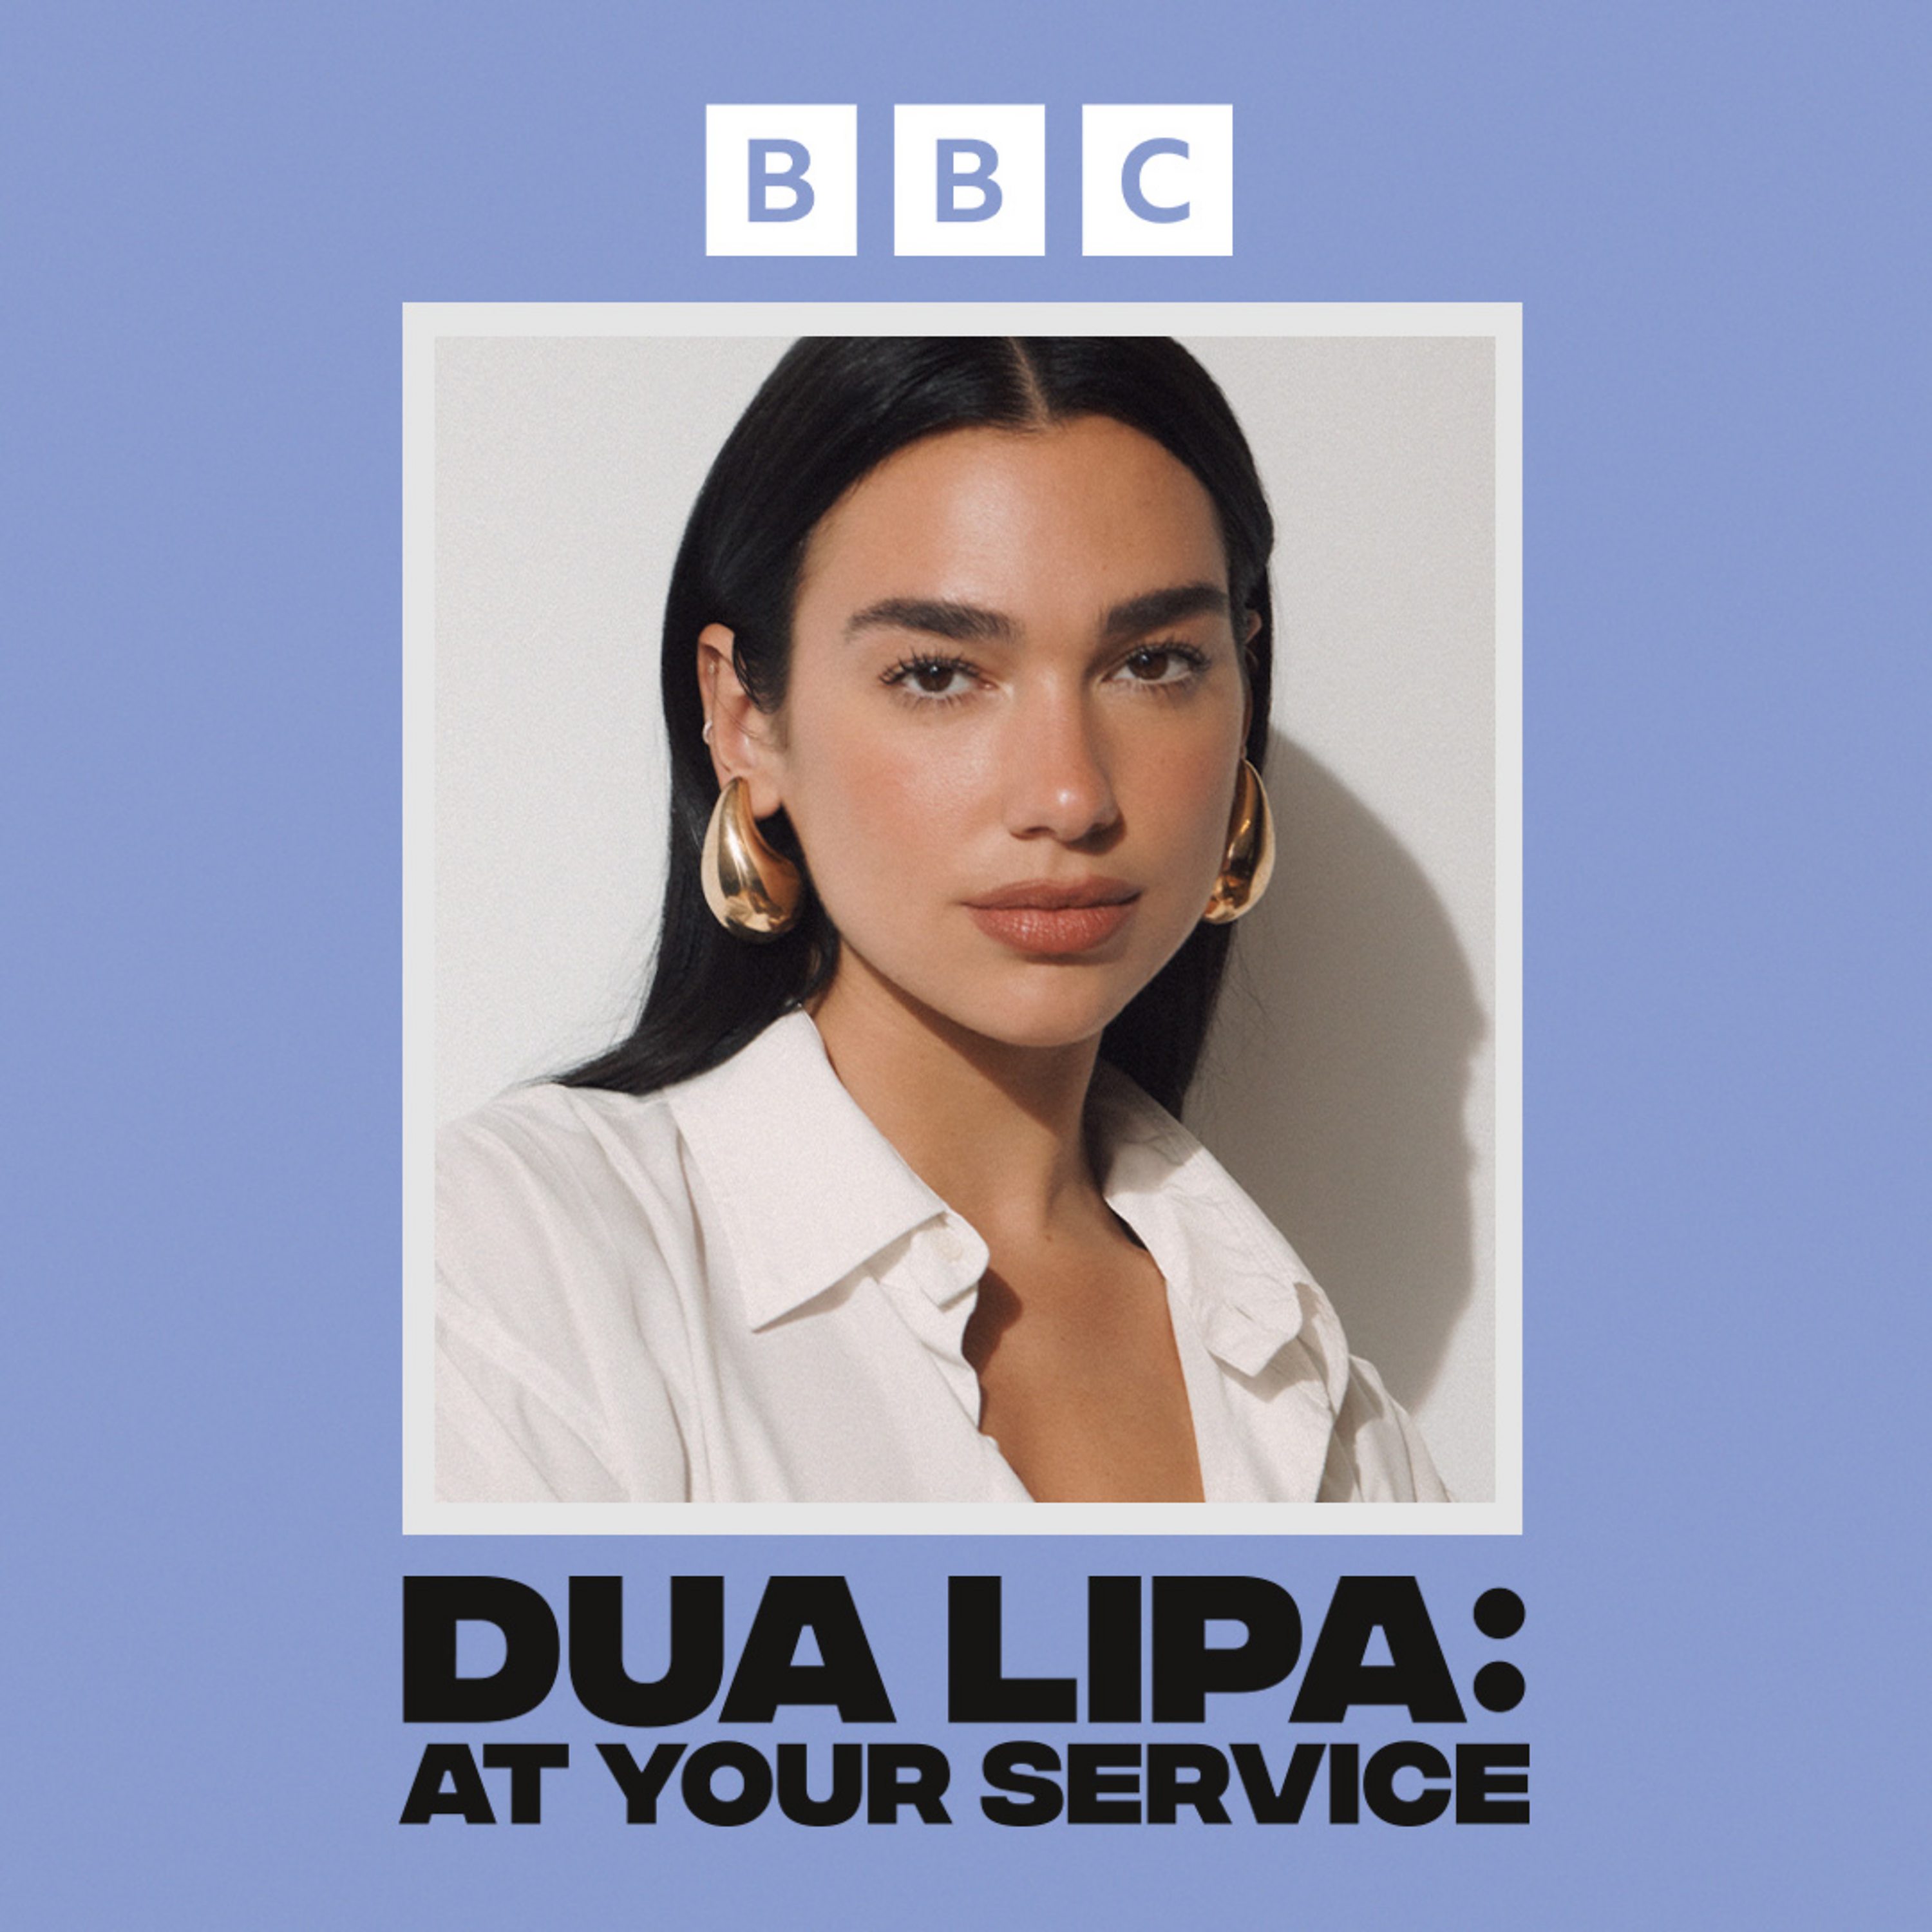 Dua Lipa: At Your Service podcast show image